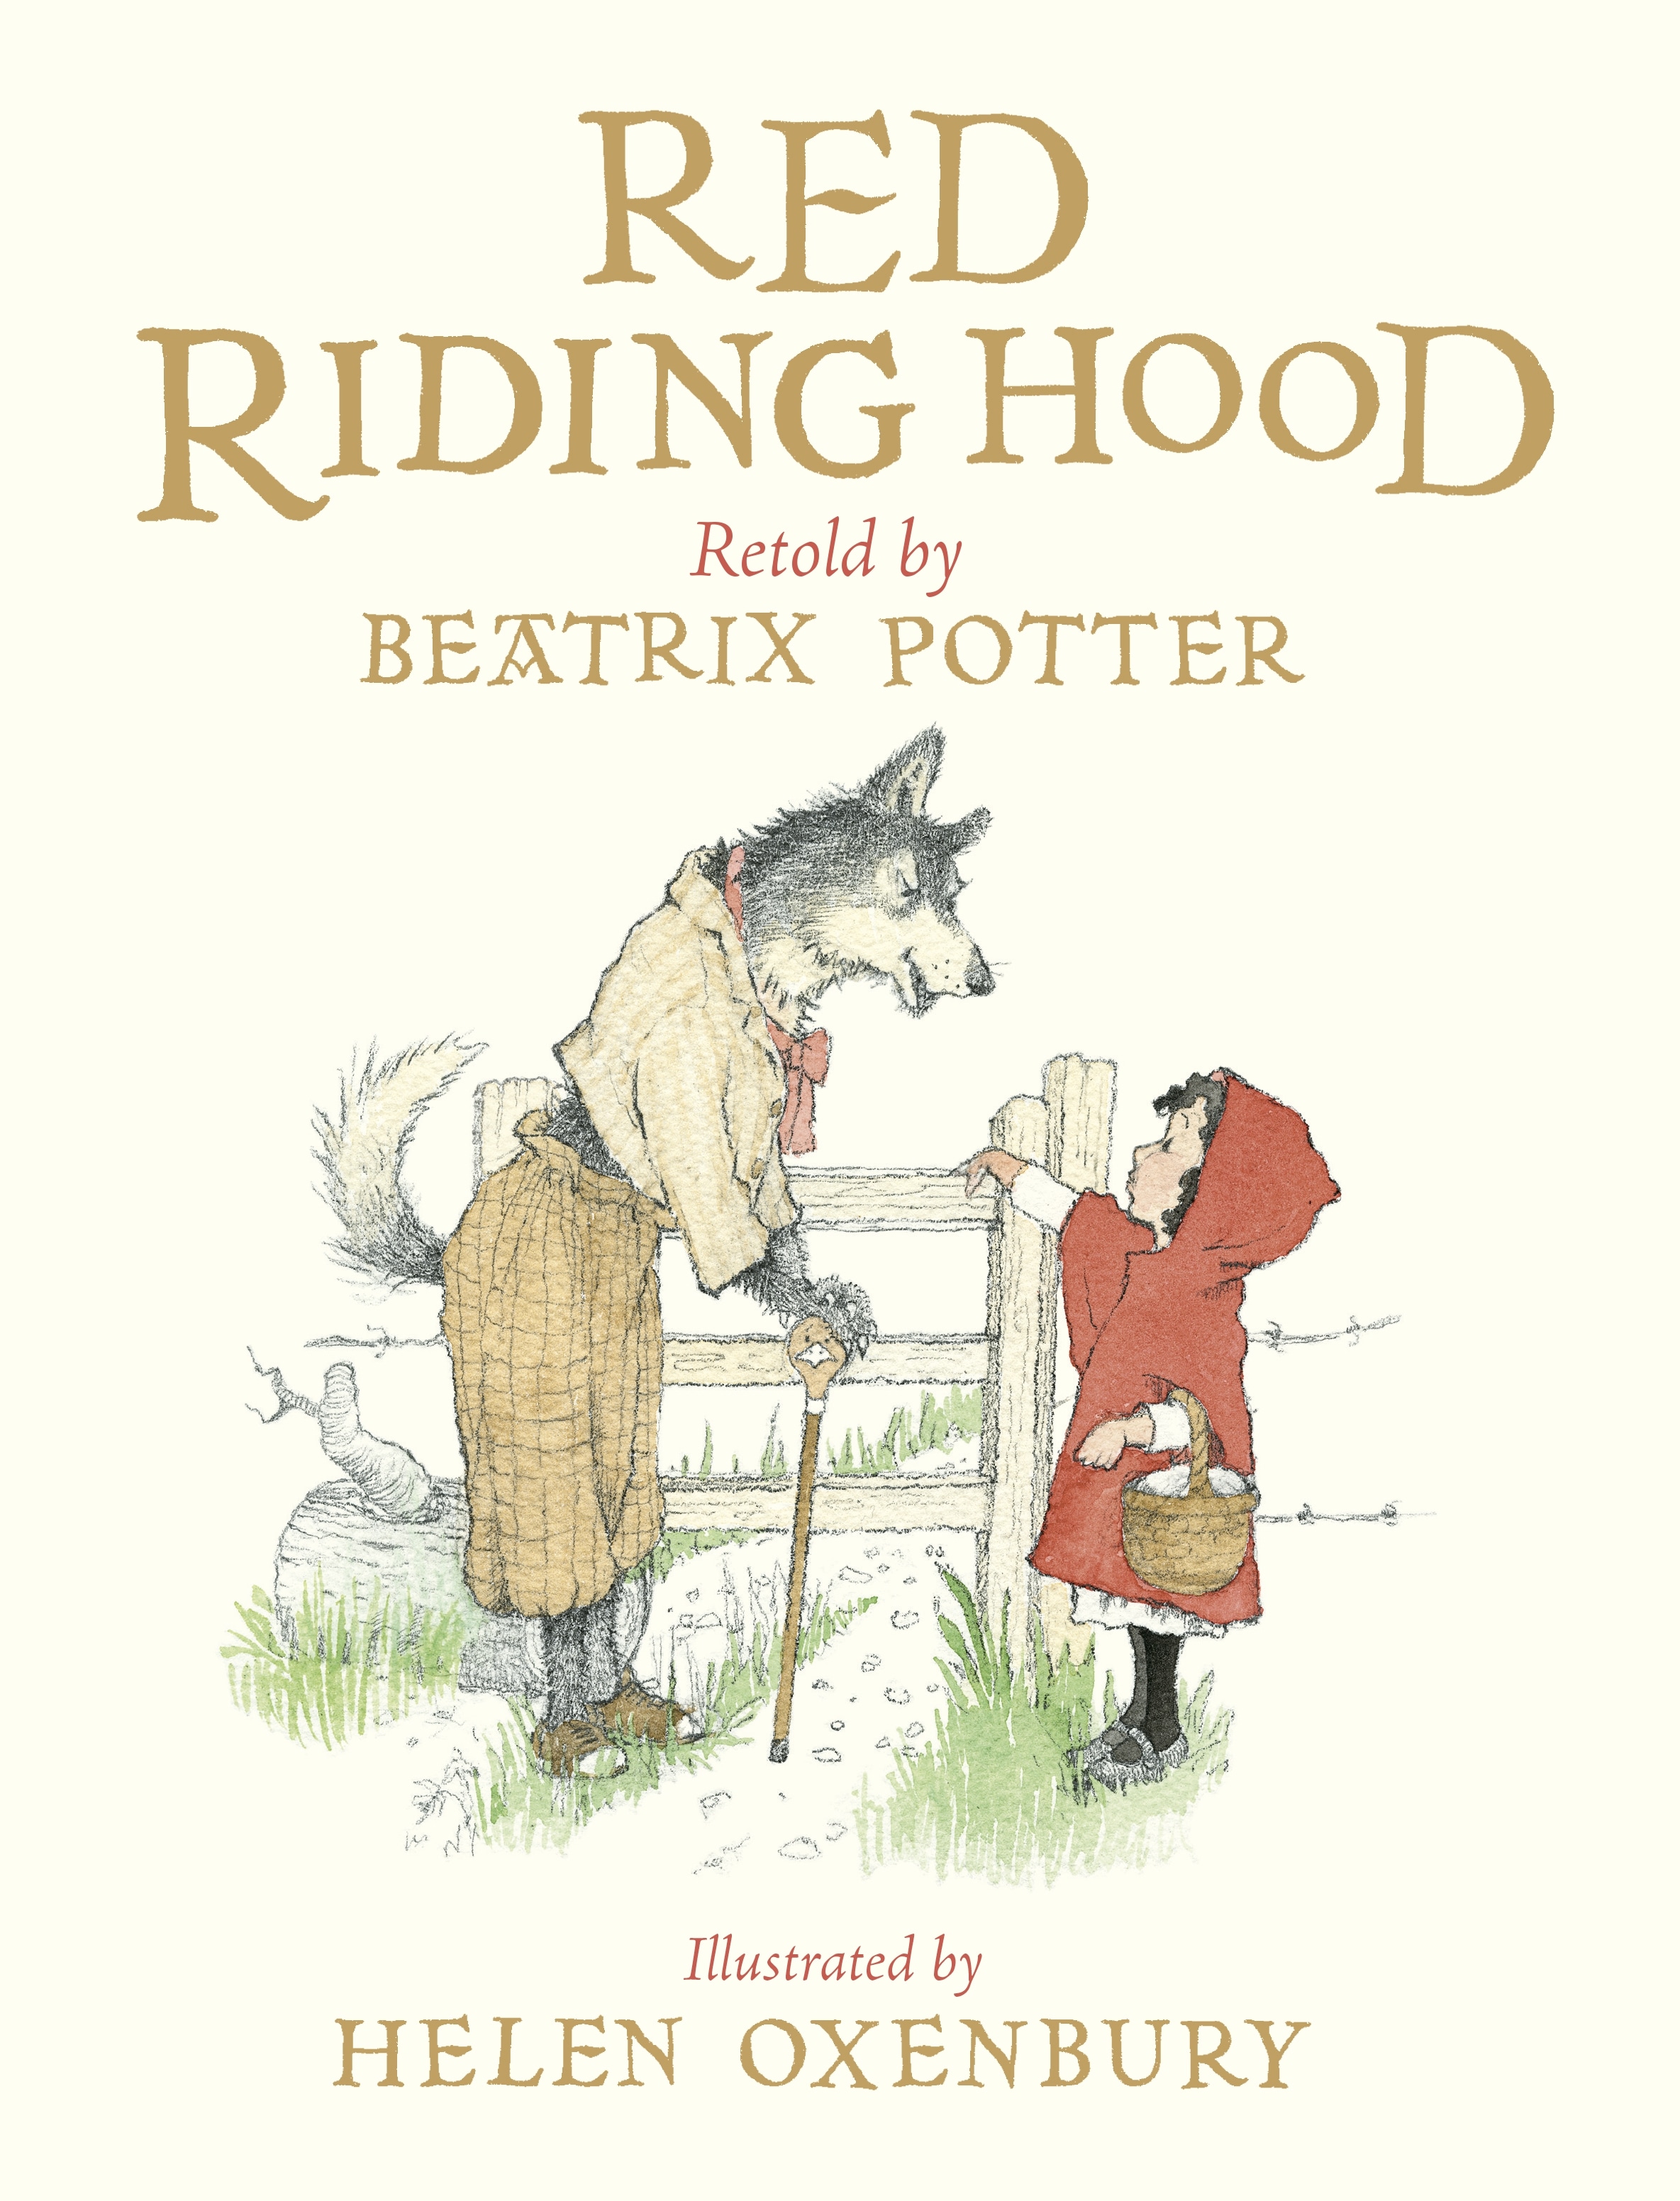 Book “Red Riding Hood” by Beatrix Potter — September 19, 2019